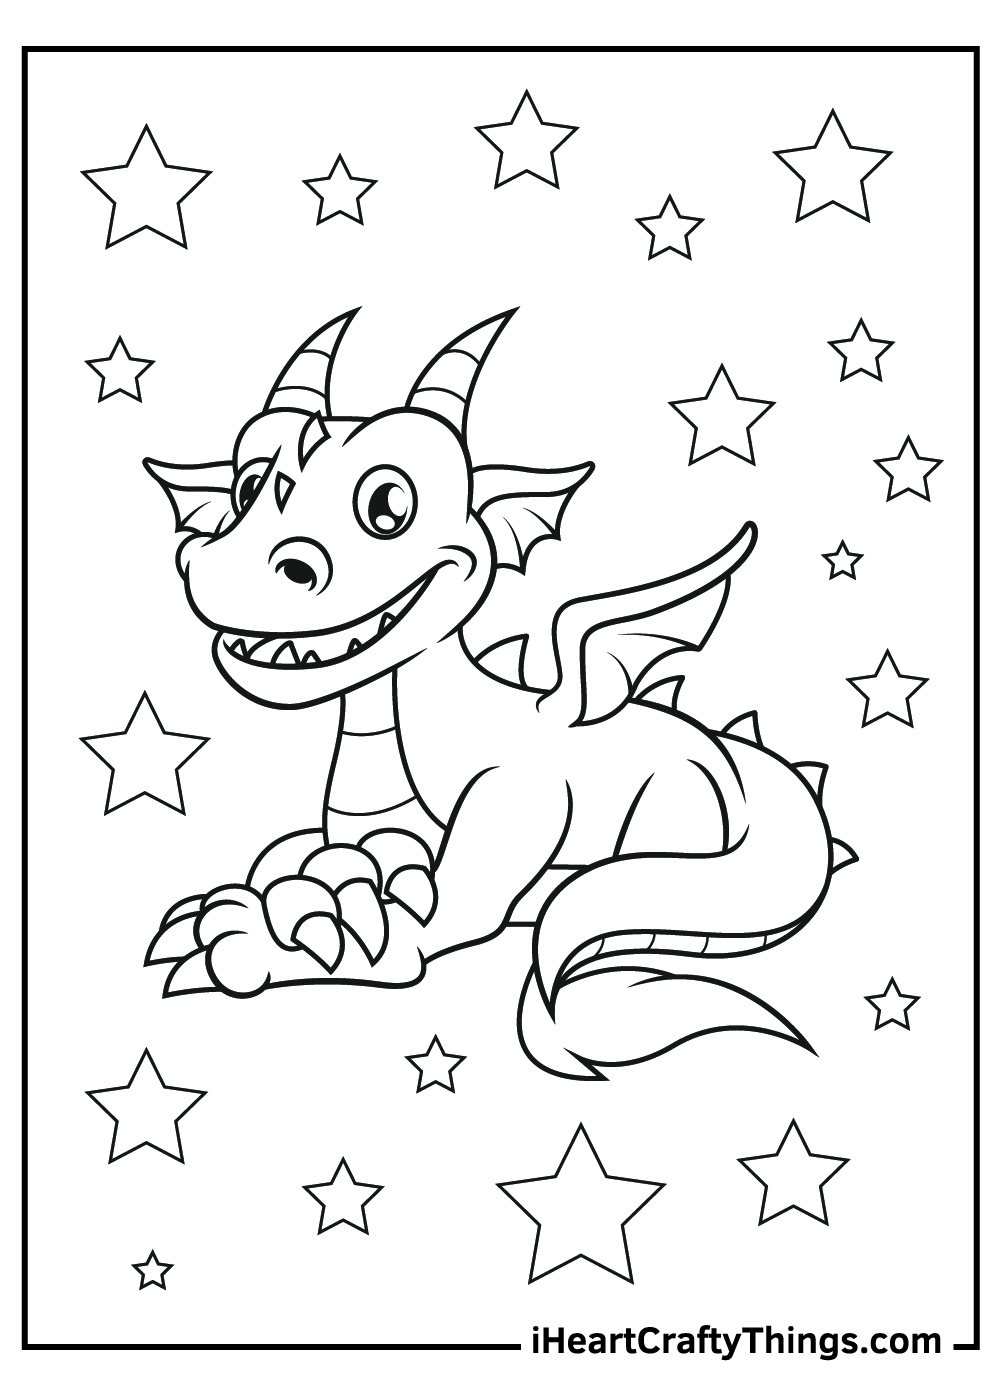 Dragon coloring pages free printables